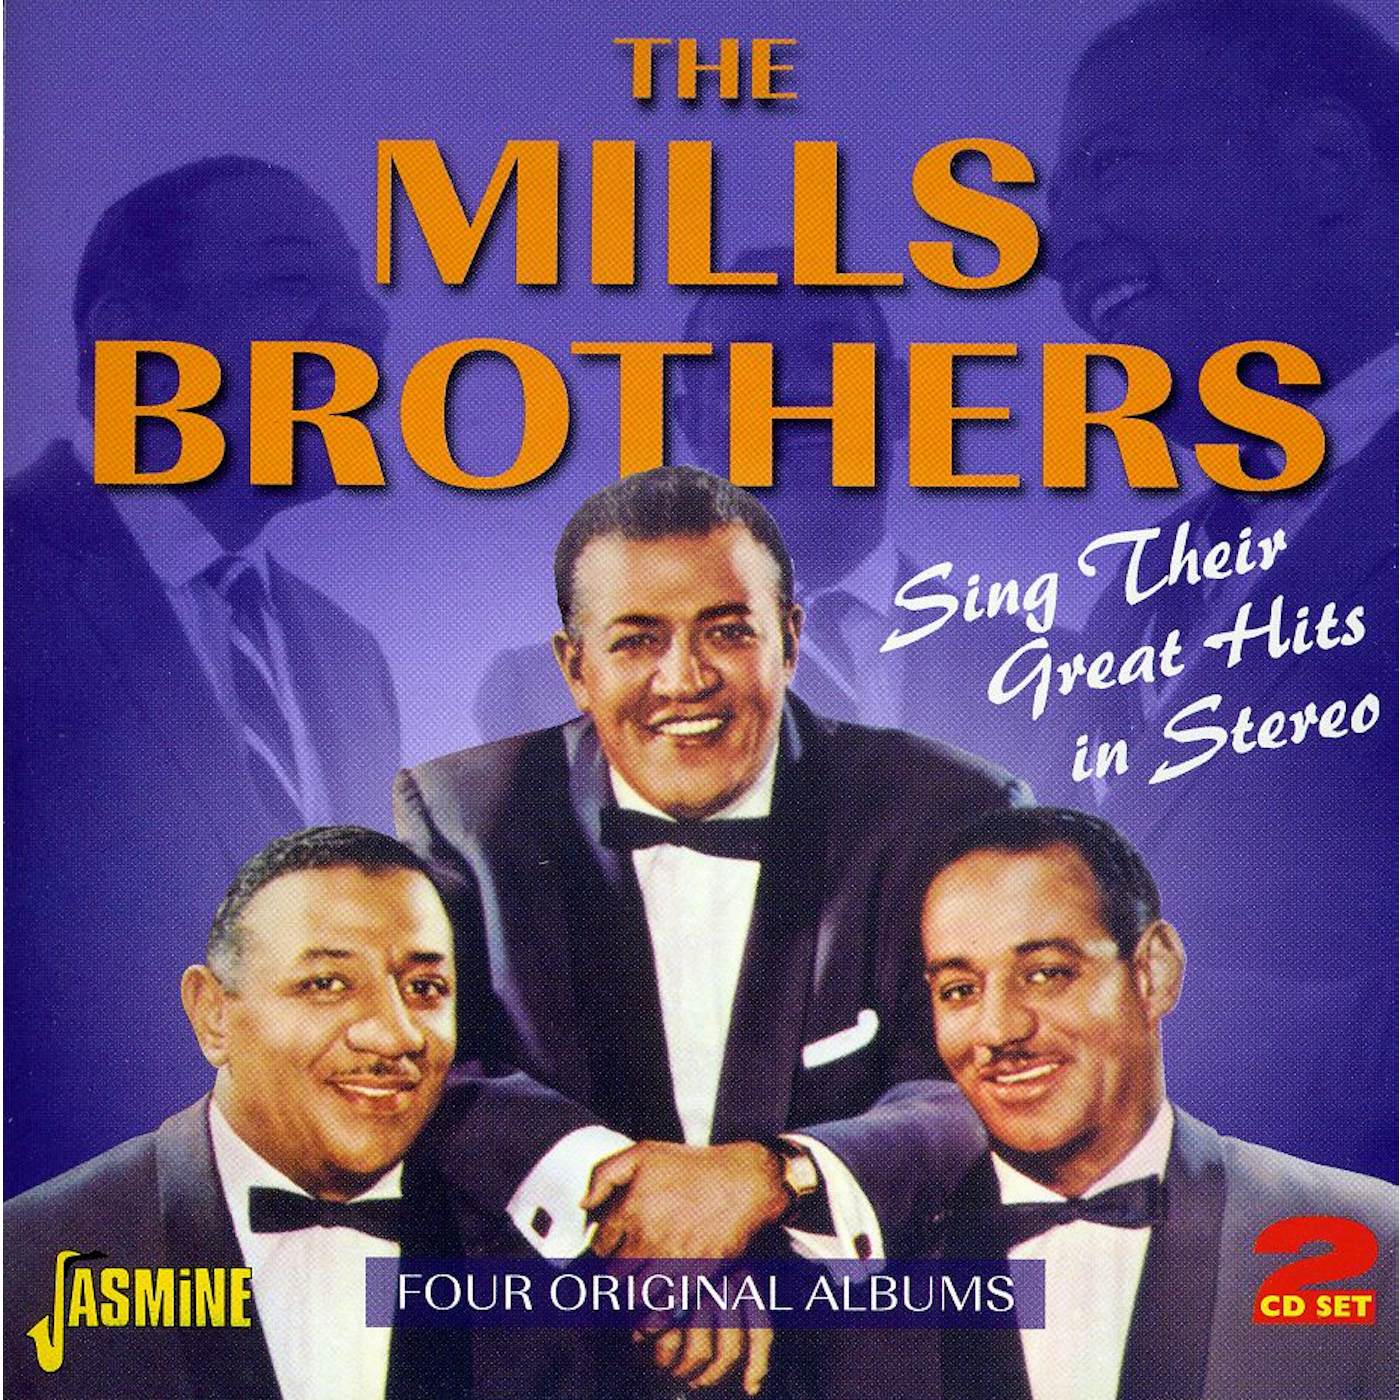 The Mills Brothers GREAT HITS IN STEREO CD